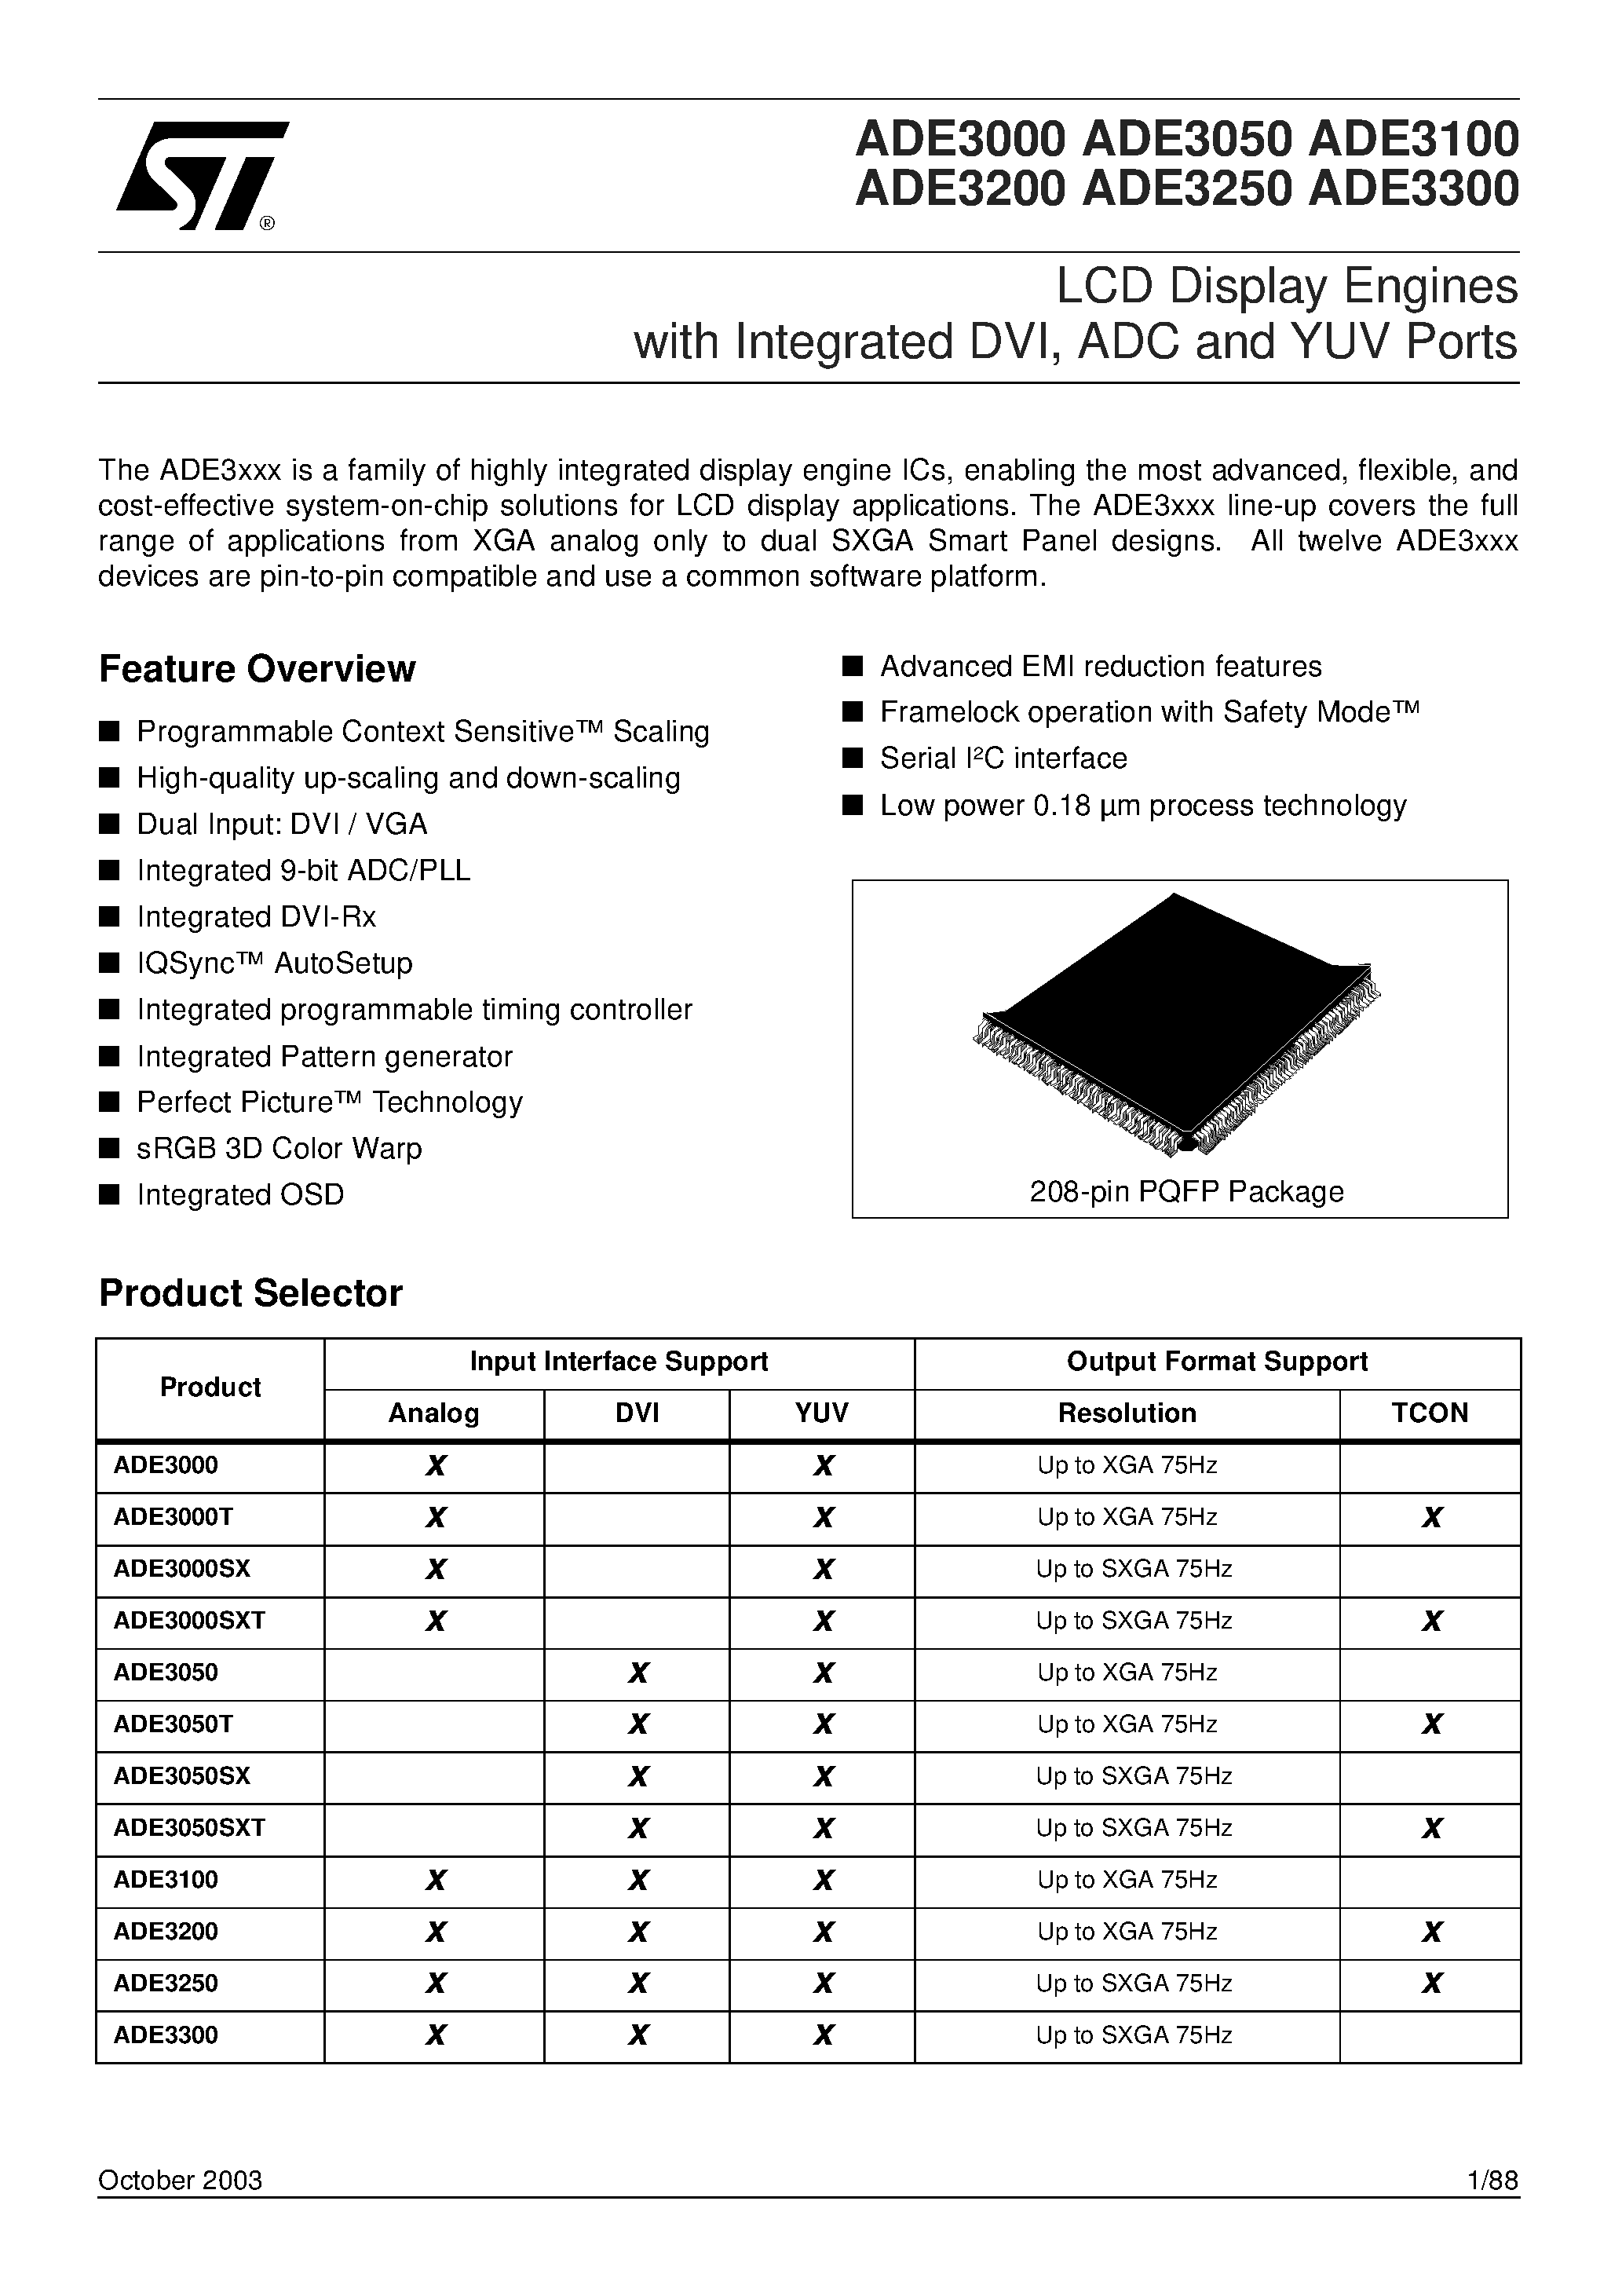 Datasheet ADE3050SX - LCD Display Engines with Integrated DVI/ ADC and YUV Ports page 1